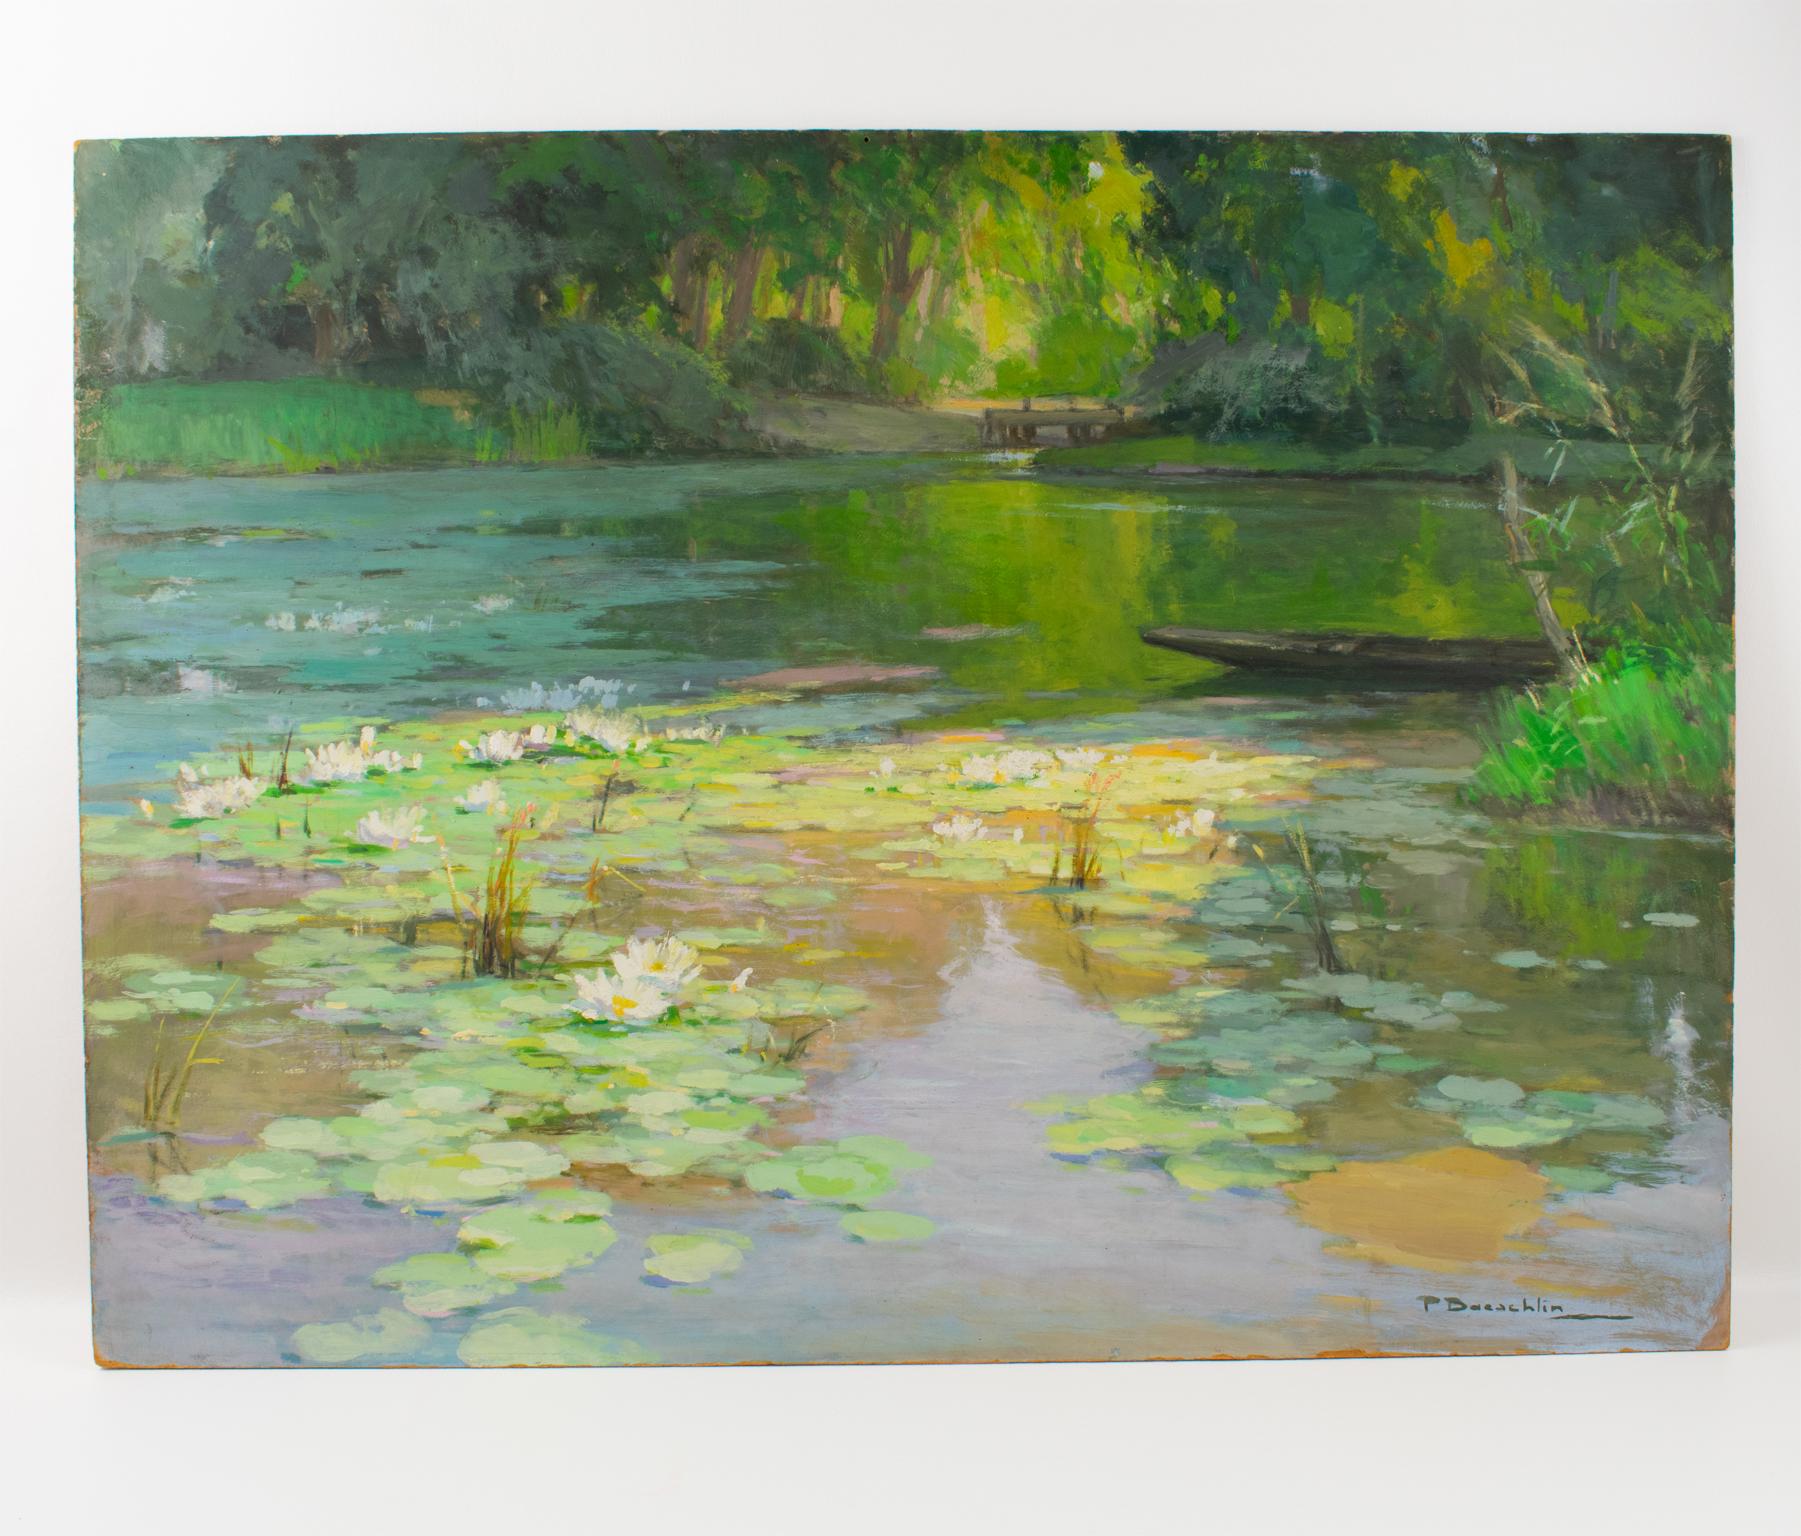 The Water Lilies, Oil on Masonite Board Painting by Pierre Laurent Baeschlin 13